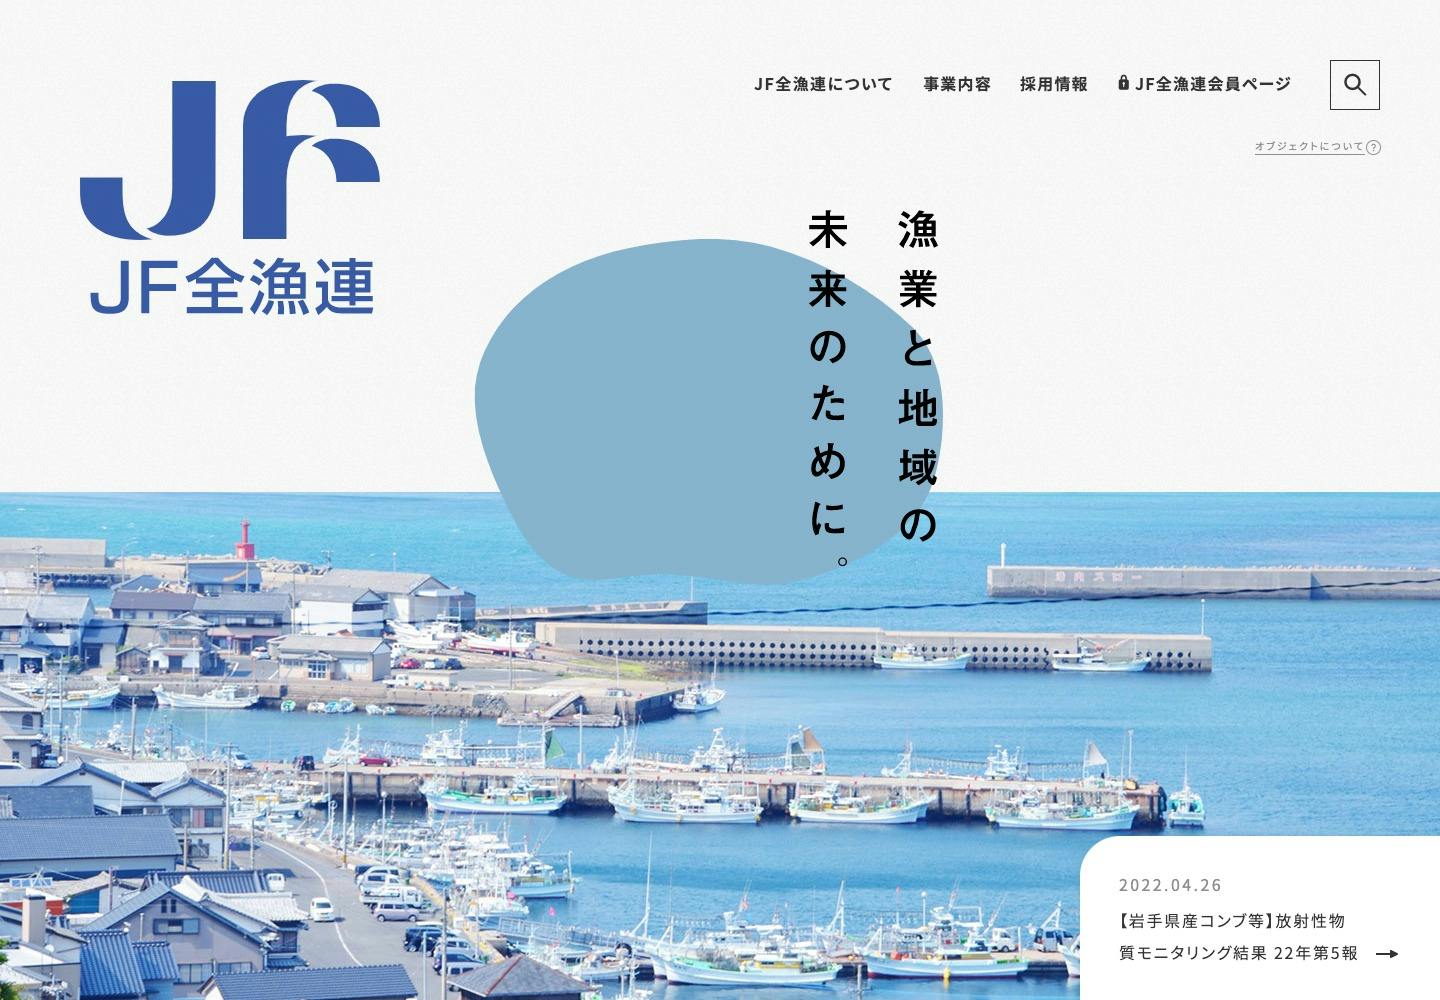 Cover Image for JF全漁連ホームページ